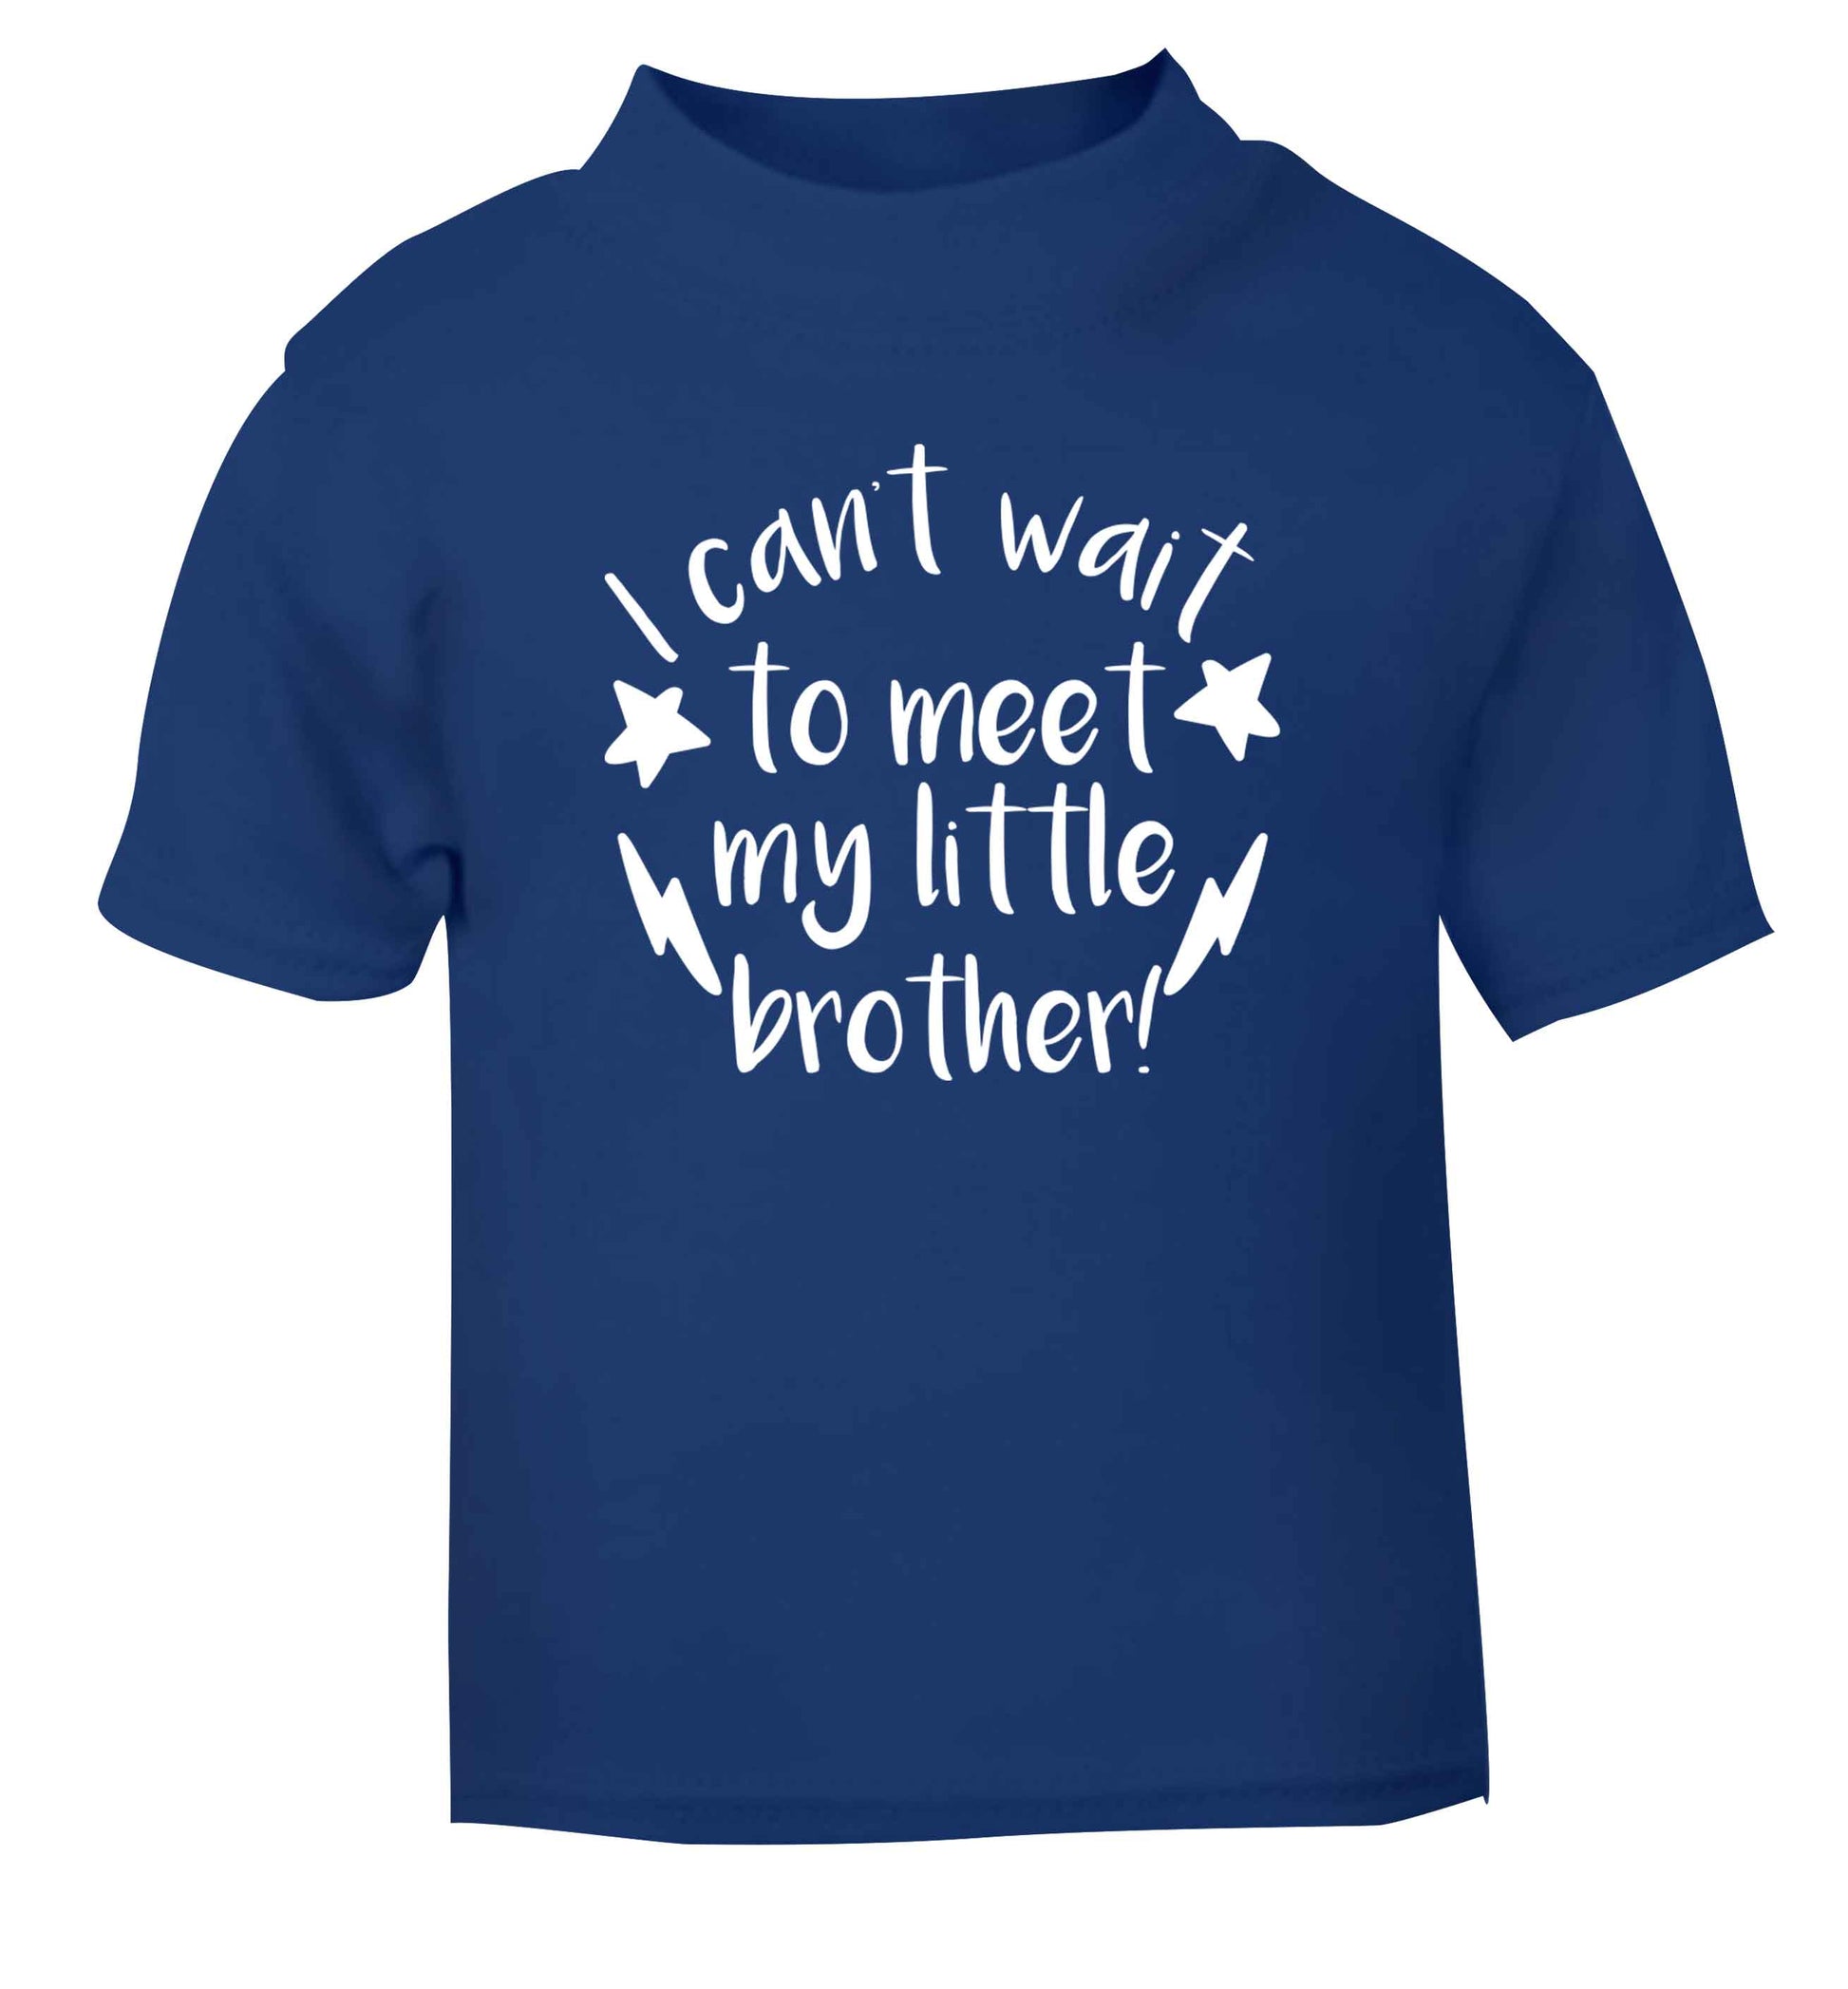 I can't wait to meet my sister! blue Baby Toddler Tshirt 2 Years